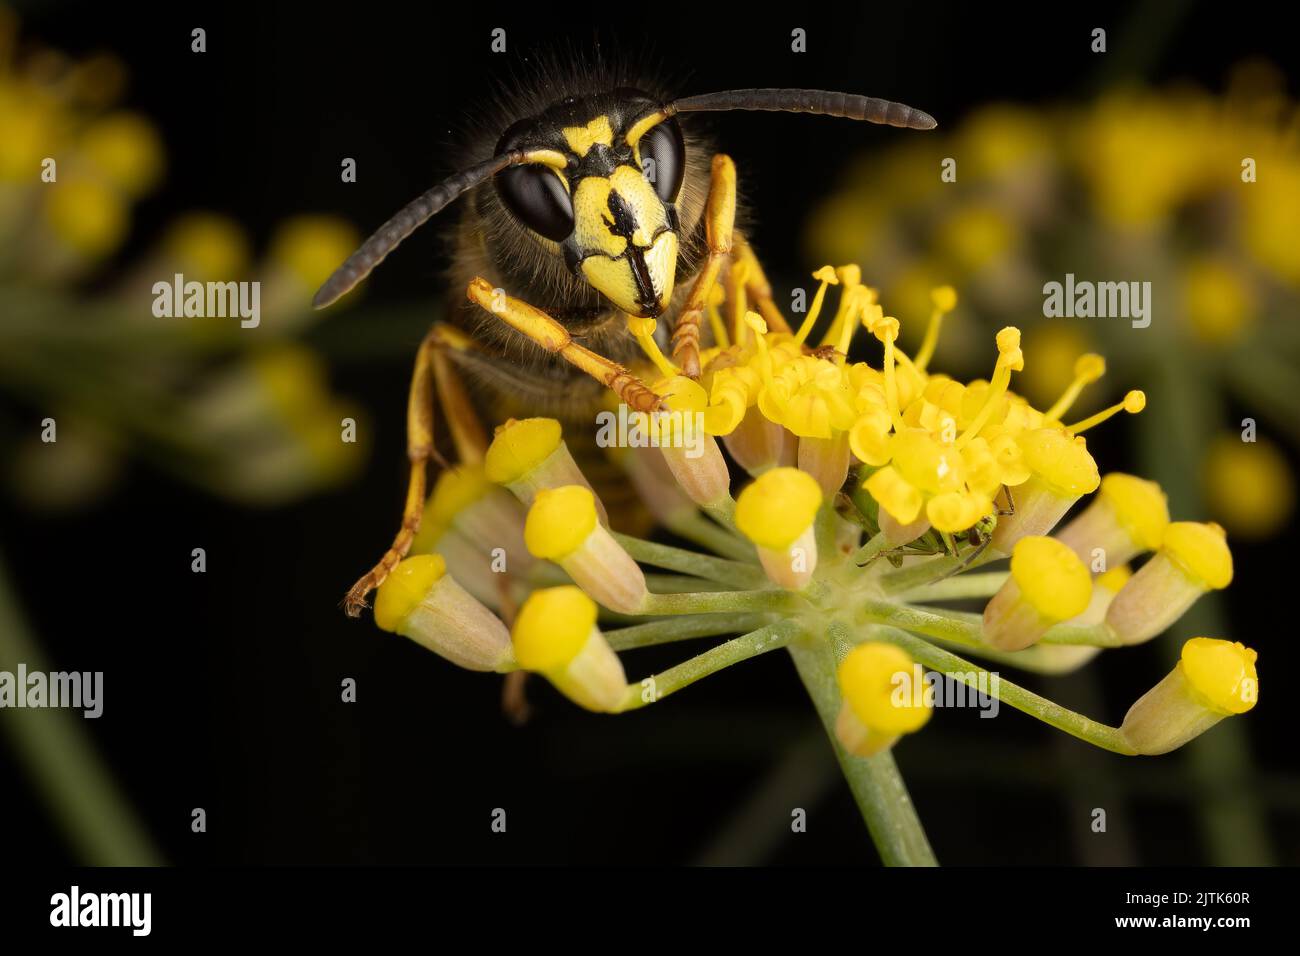 Portrait of a Saxon Wasp feeding on a fennel flower in a Kent garden, UK. This species is a recent colonist to Britain. Stock Photo